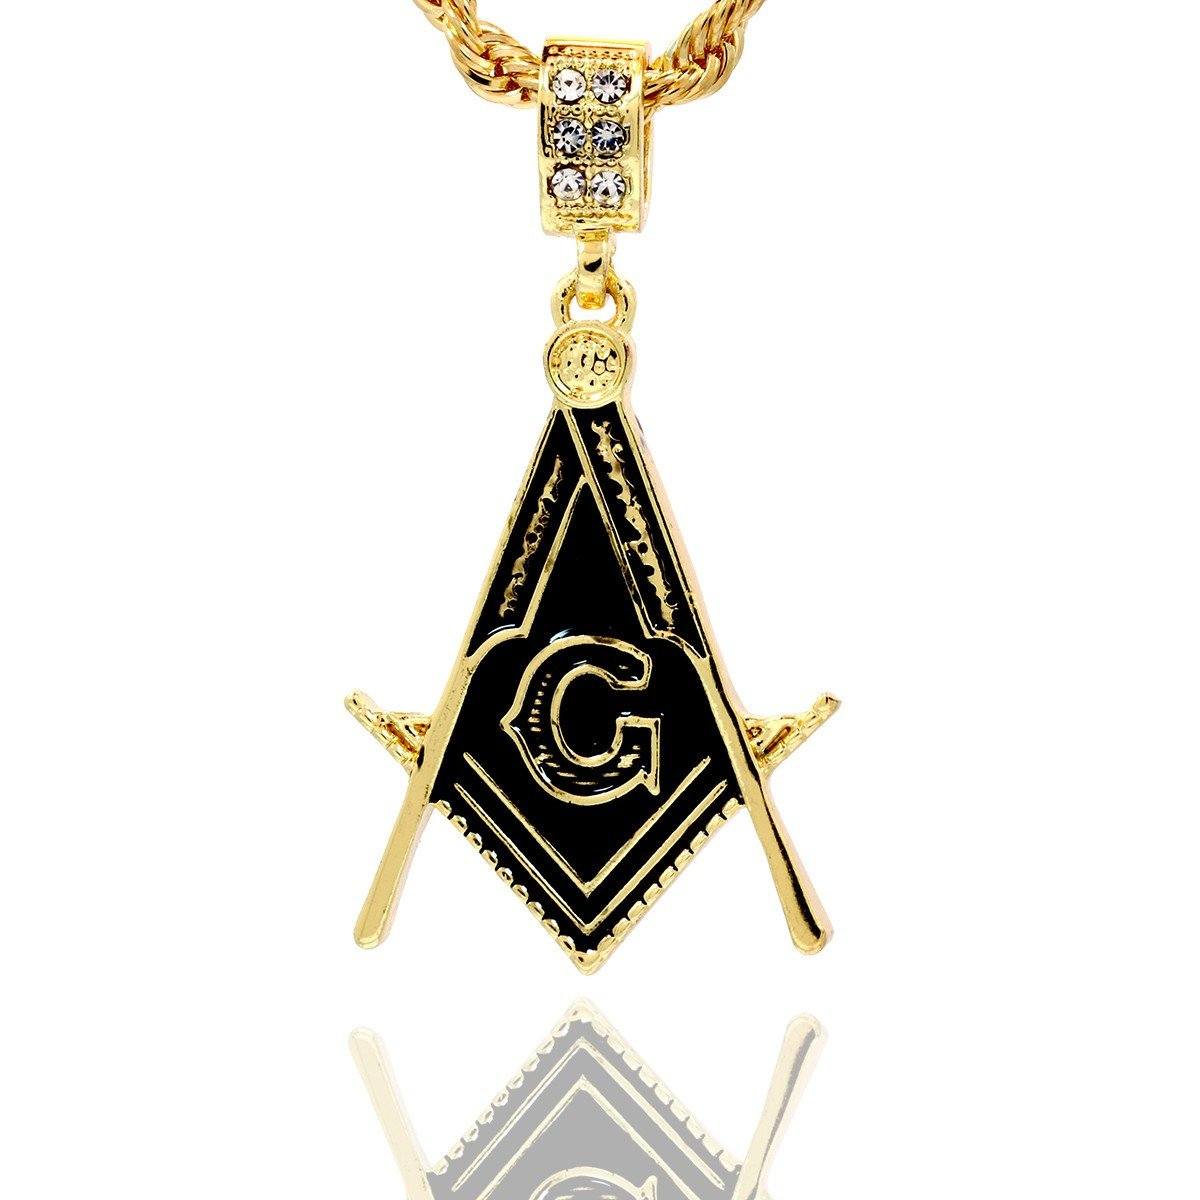 MASON PENDANT WITH GOLD ROPE CHAIN